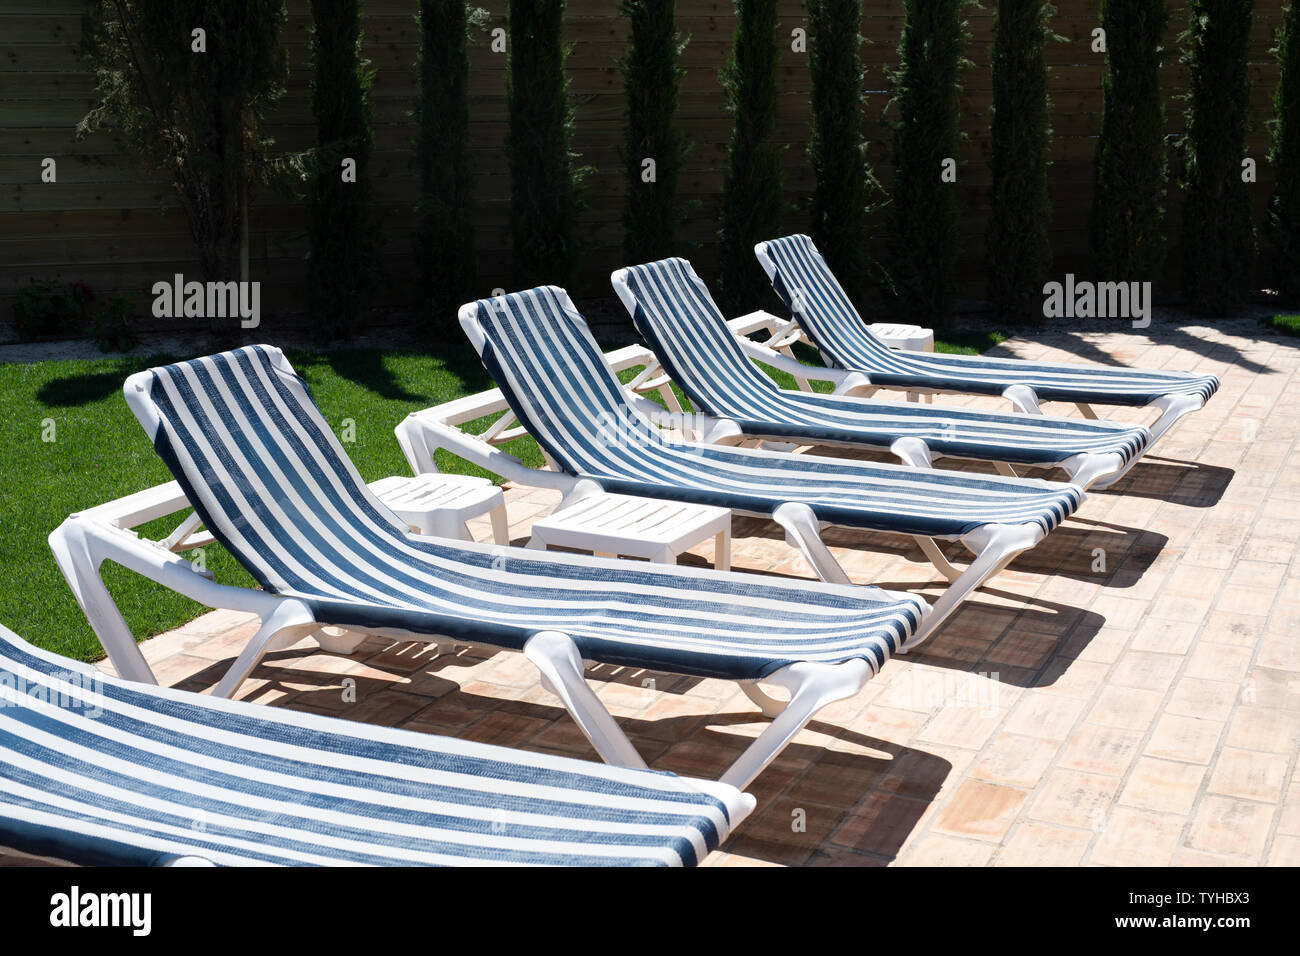 row of stripy blue and white sunbeds in the sun Stock Photo